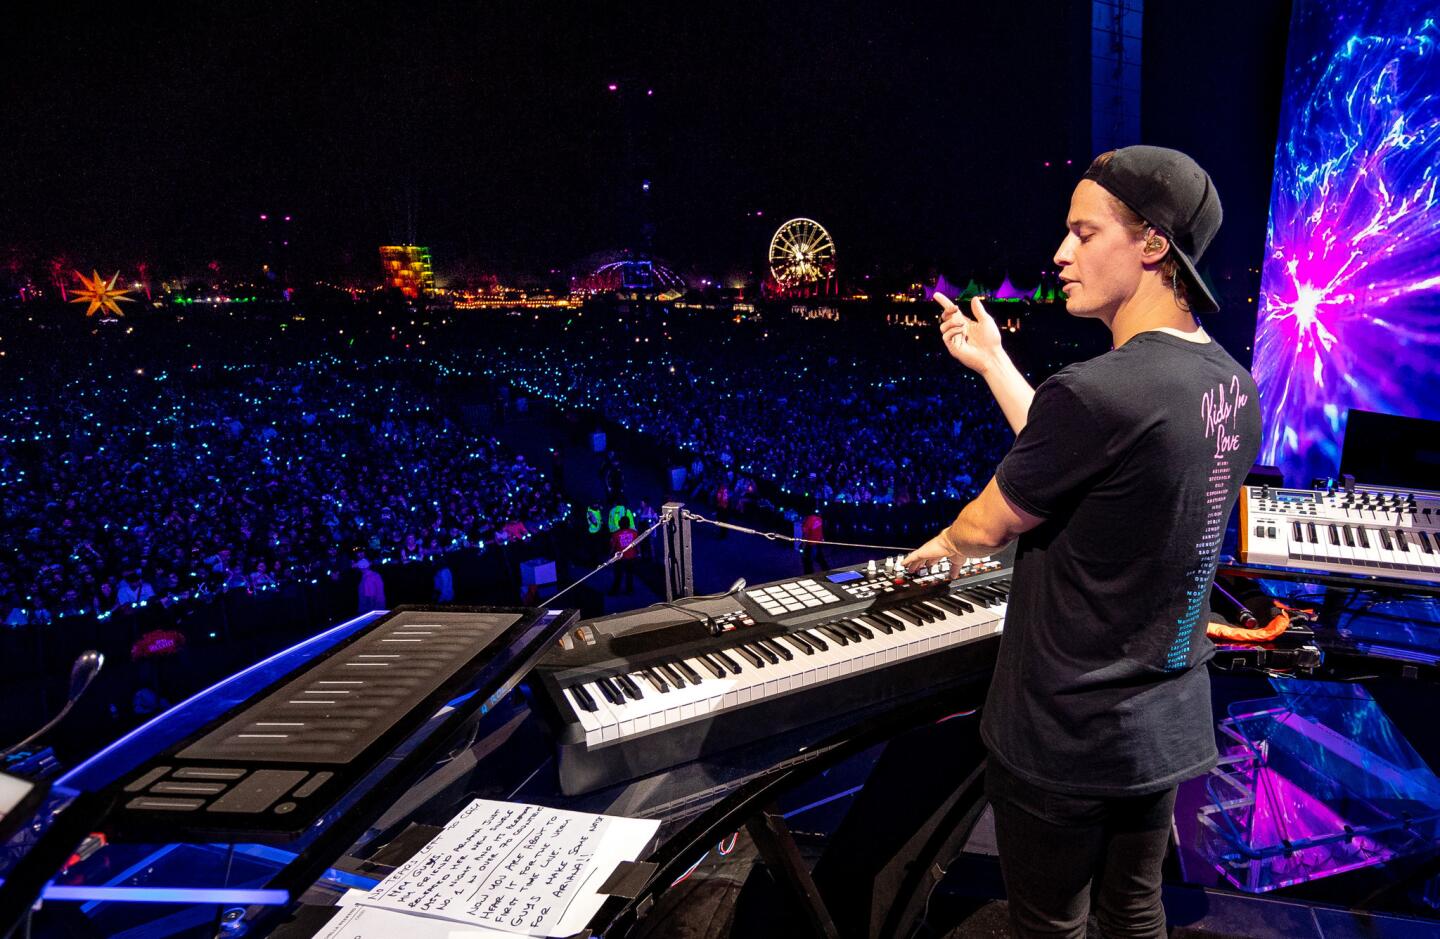 Kygo will perform at the Preakness InfieldFest on May 18, 2019.